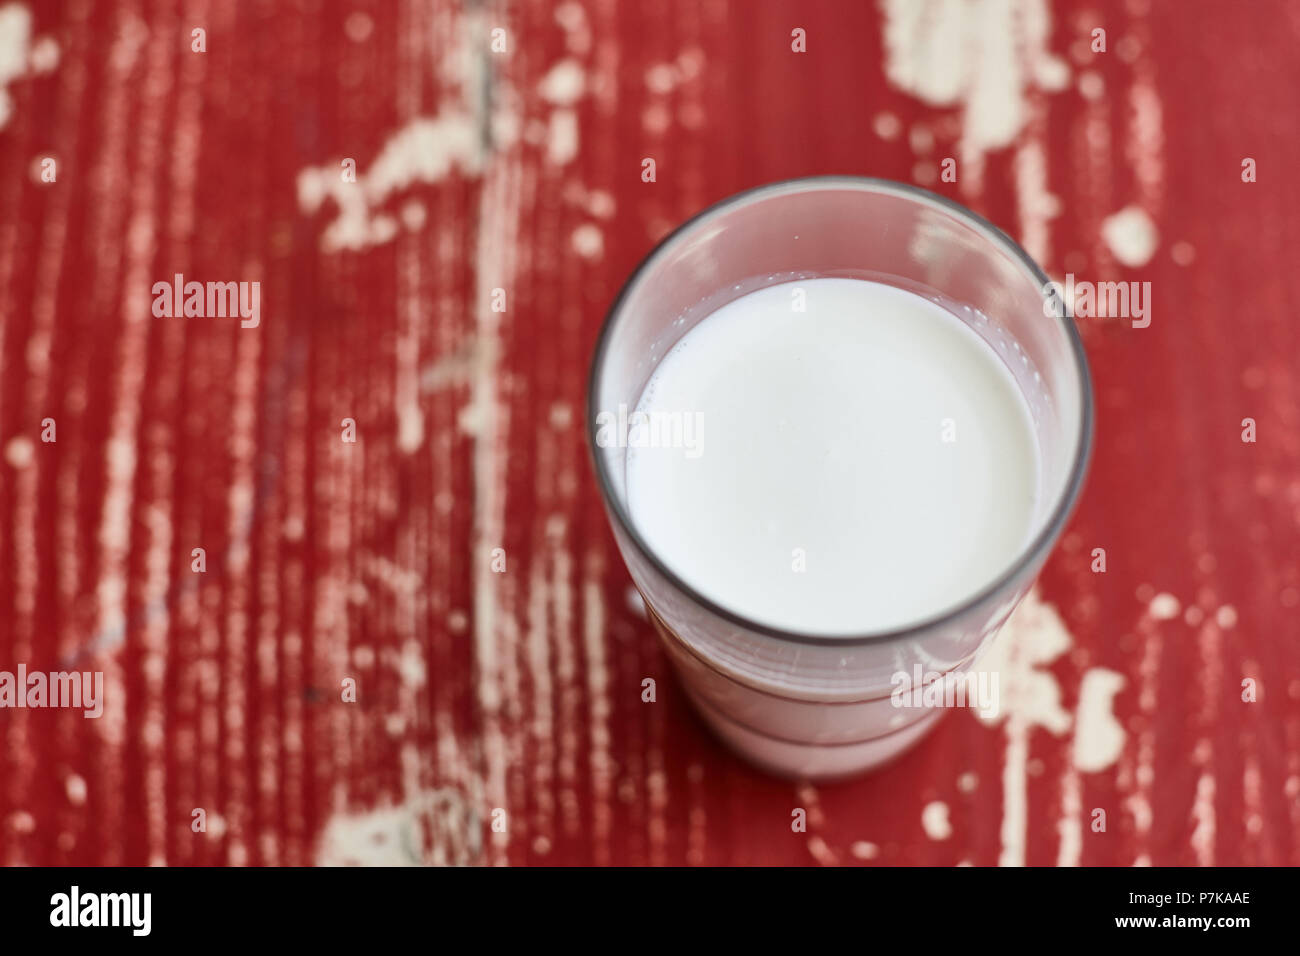 Glass of milk on red wooden table, full glass, from above Stock Photo